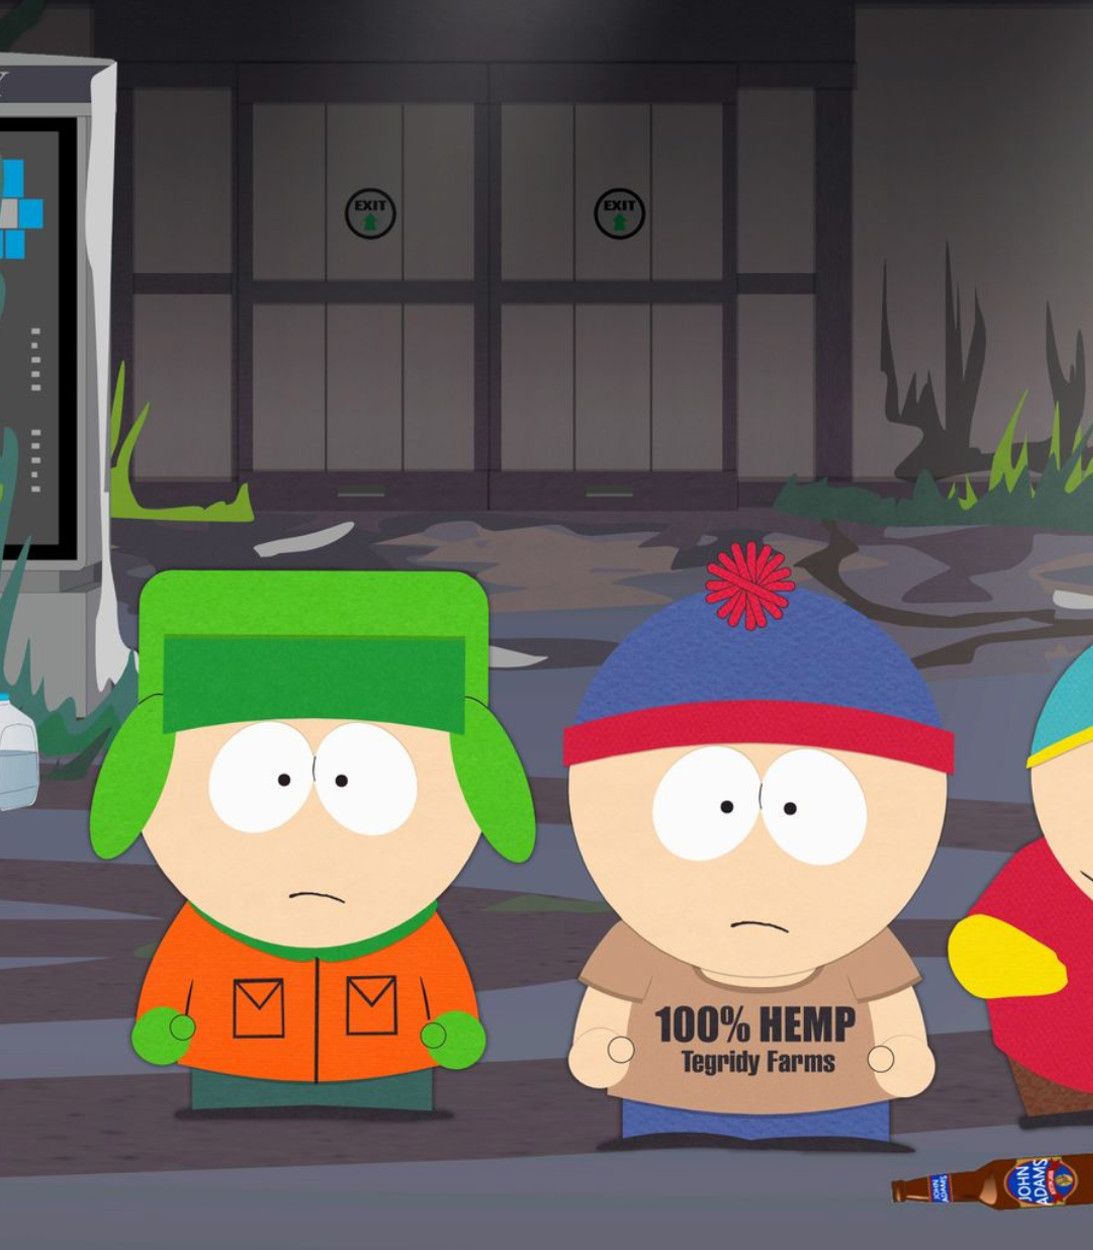 Stan and Kyle in South Park